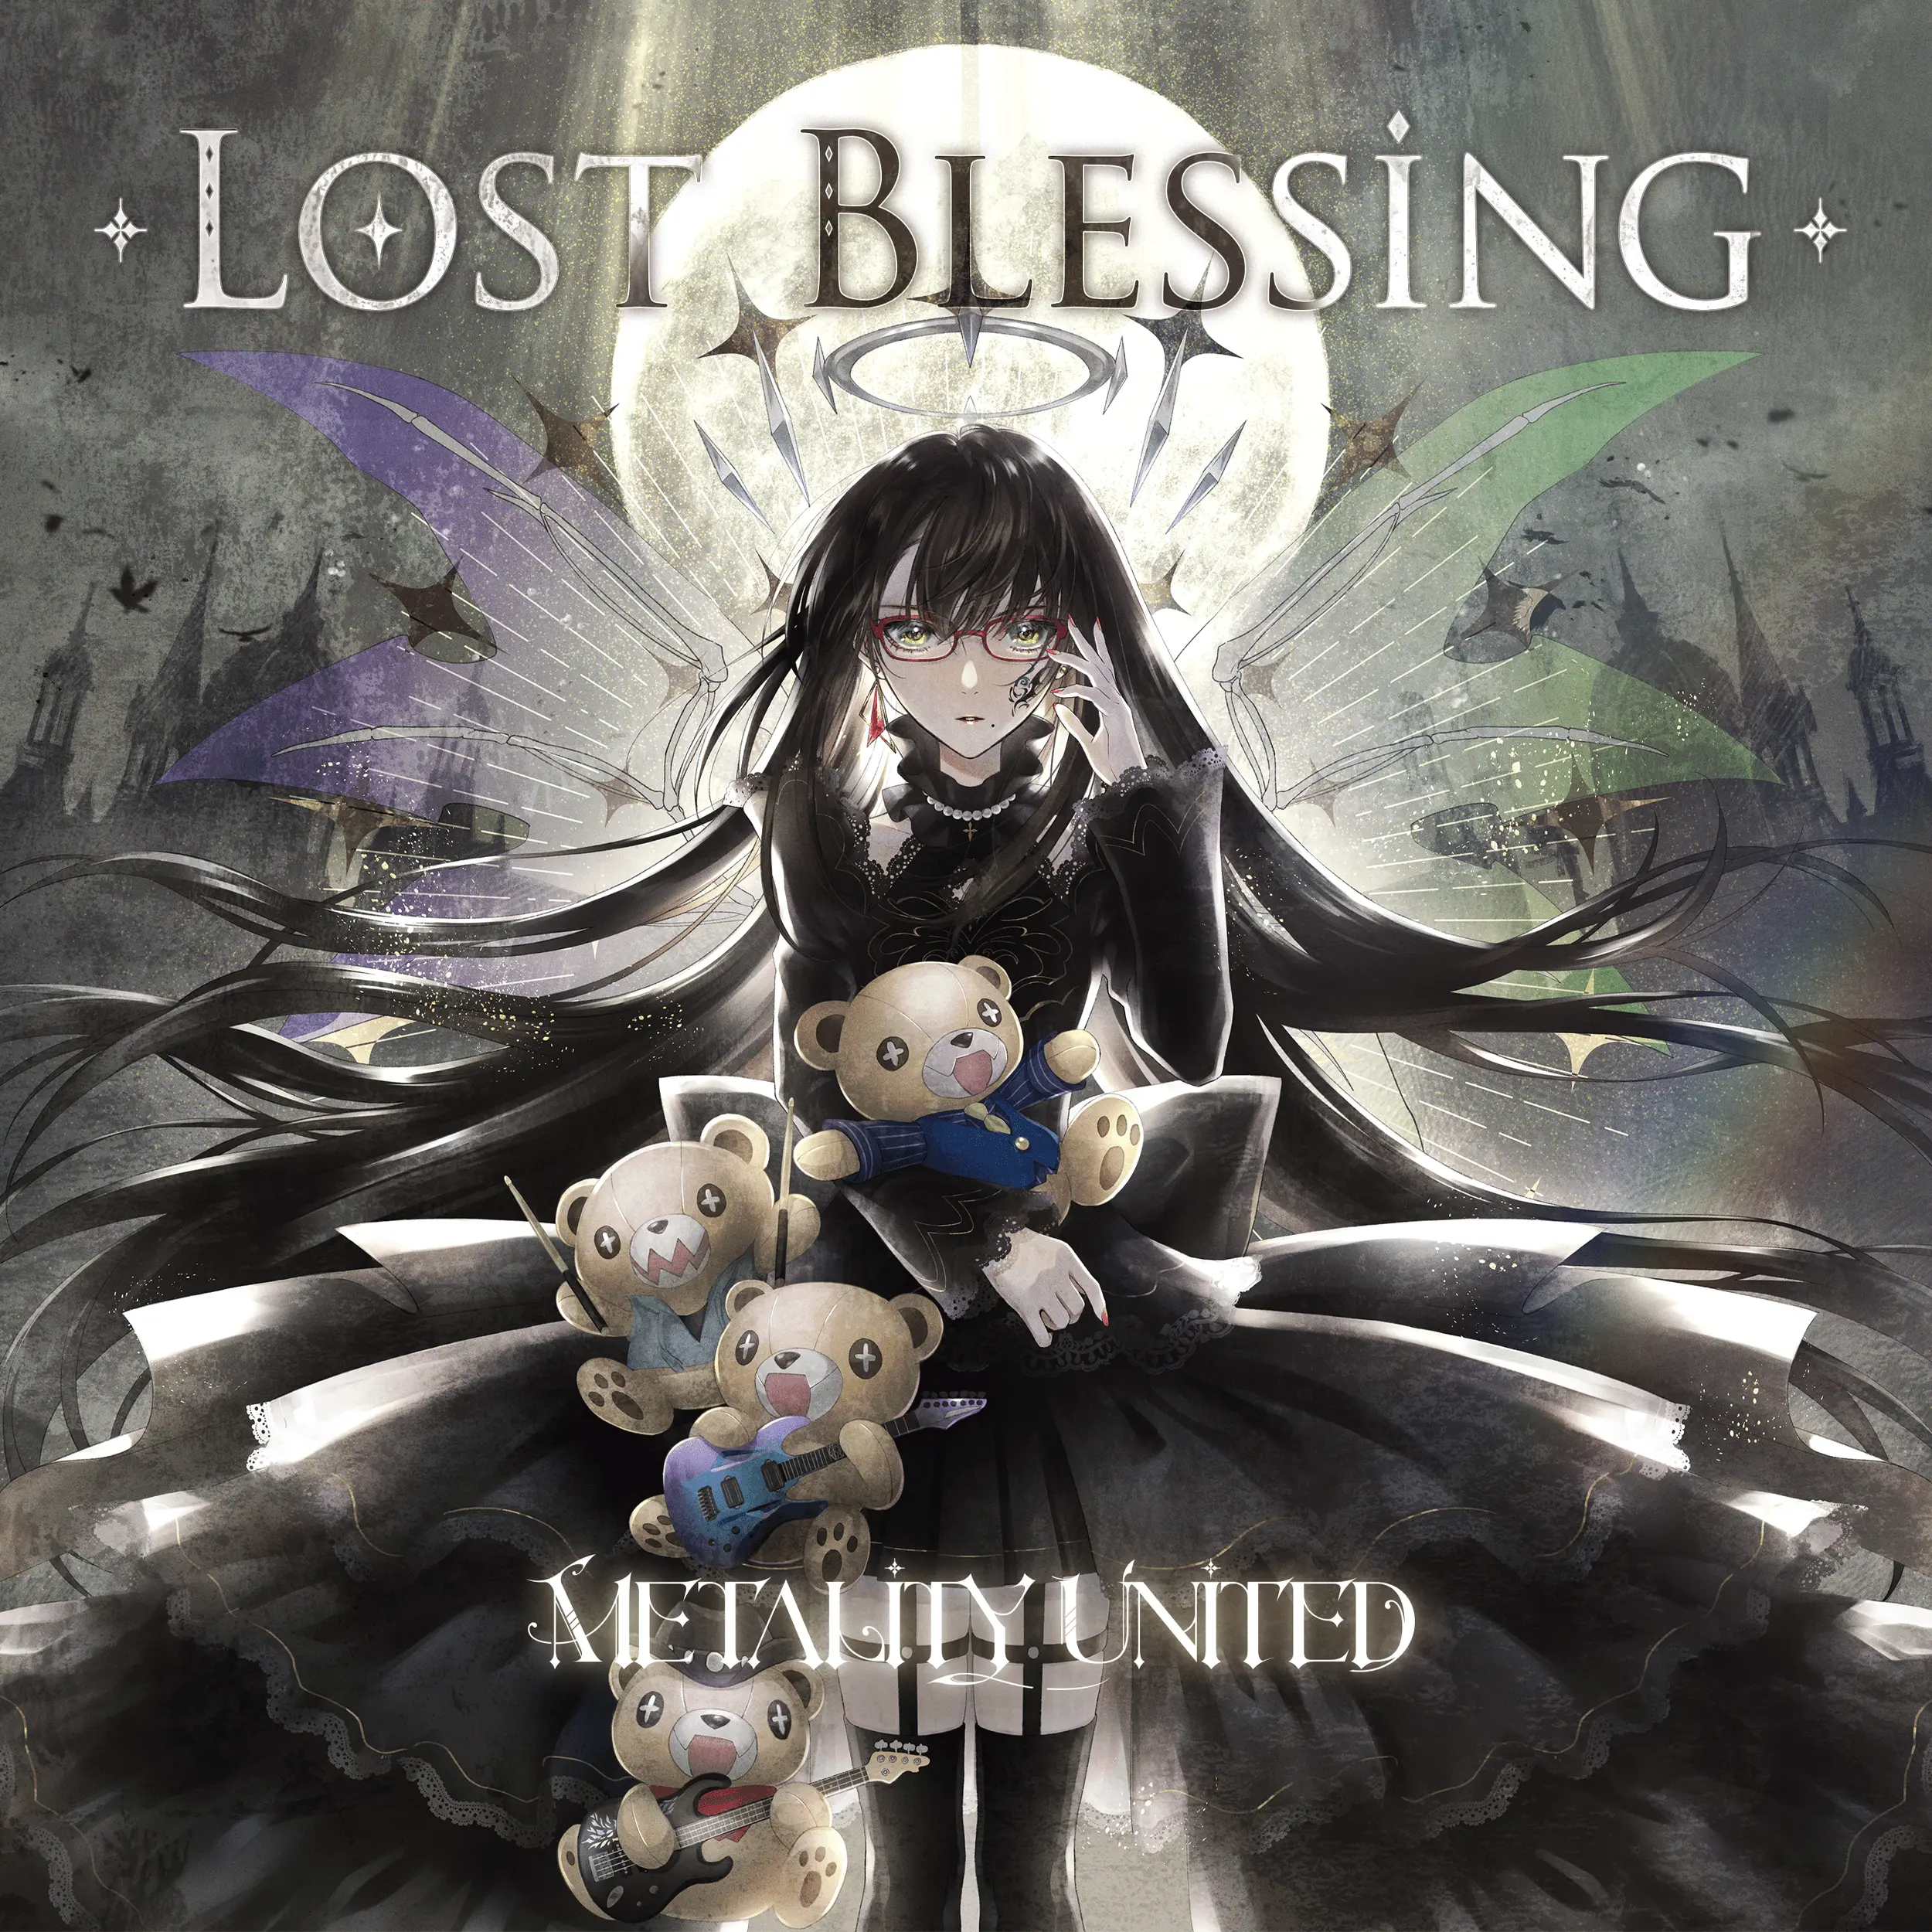 LOST BLESSING情報ページへのリンク